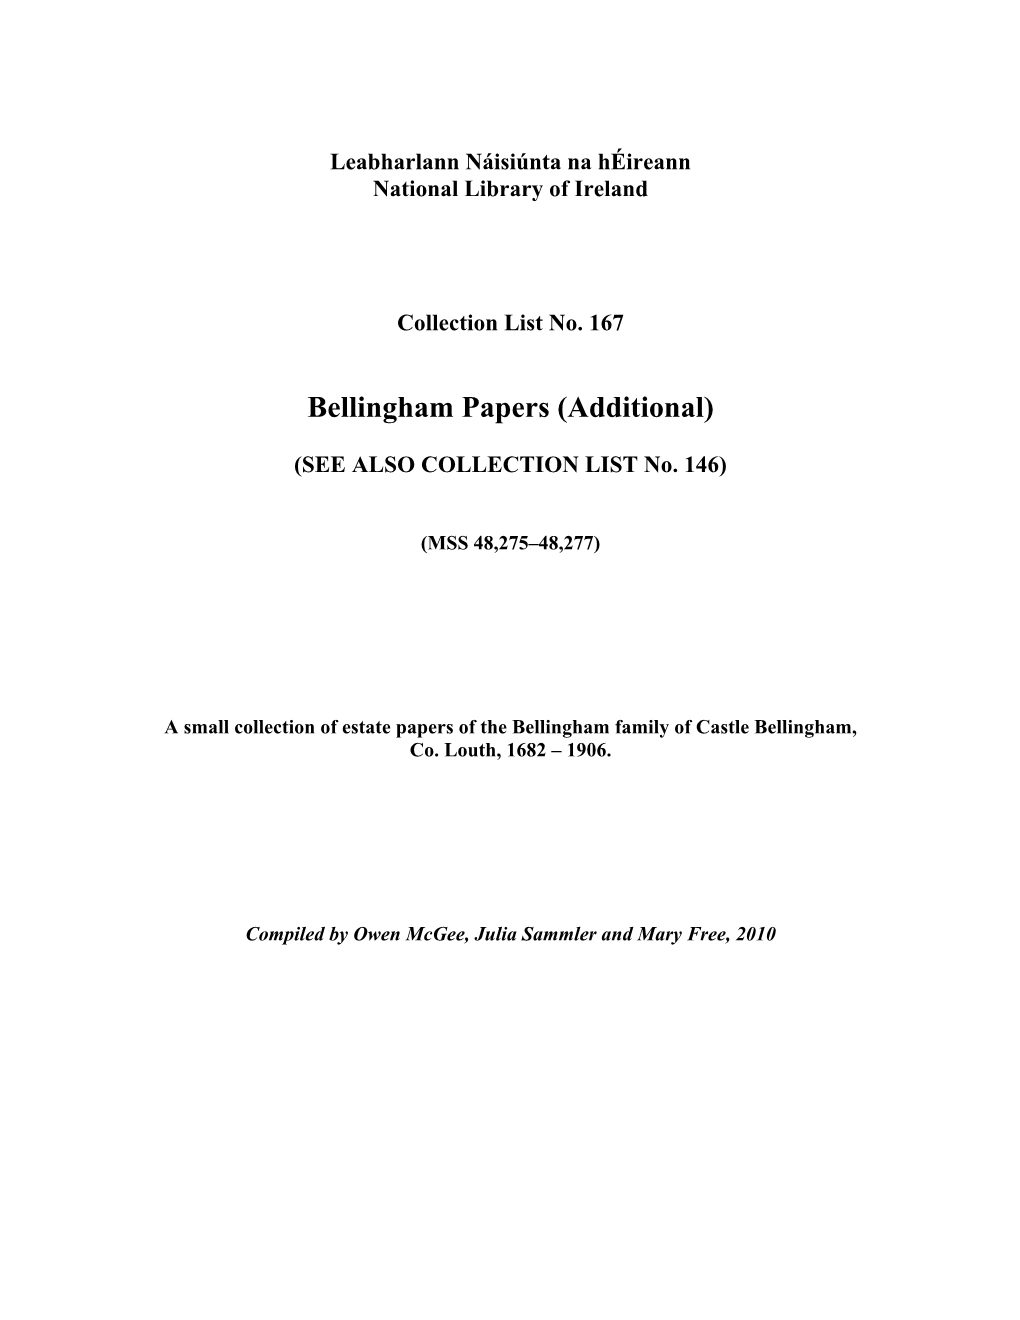 Bellingham Papers (Additional)